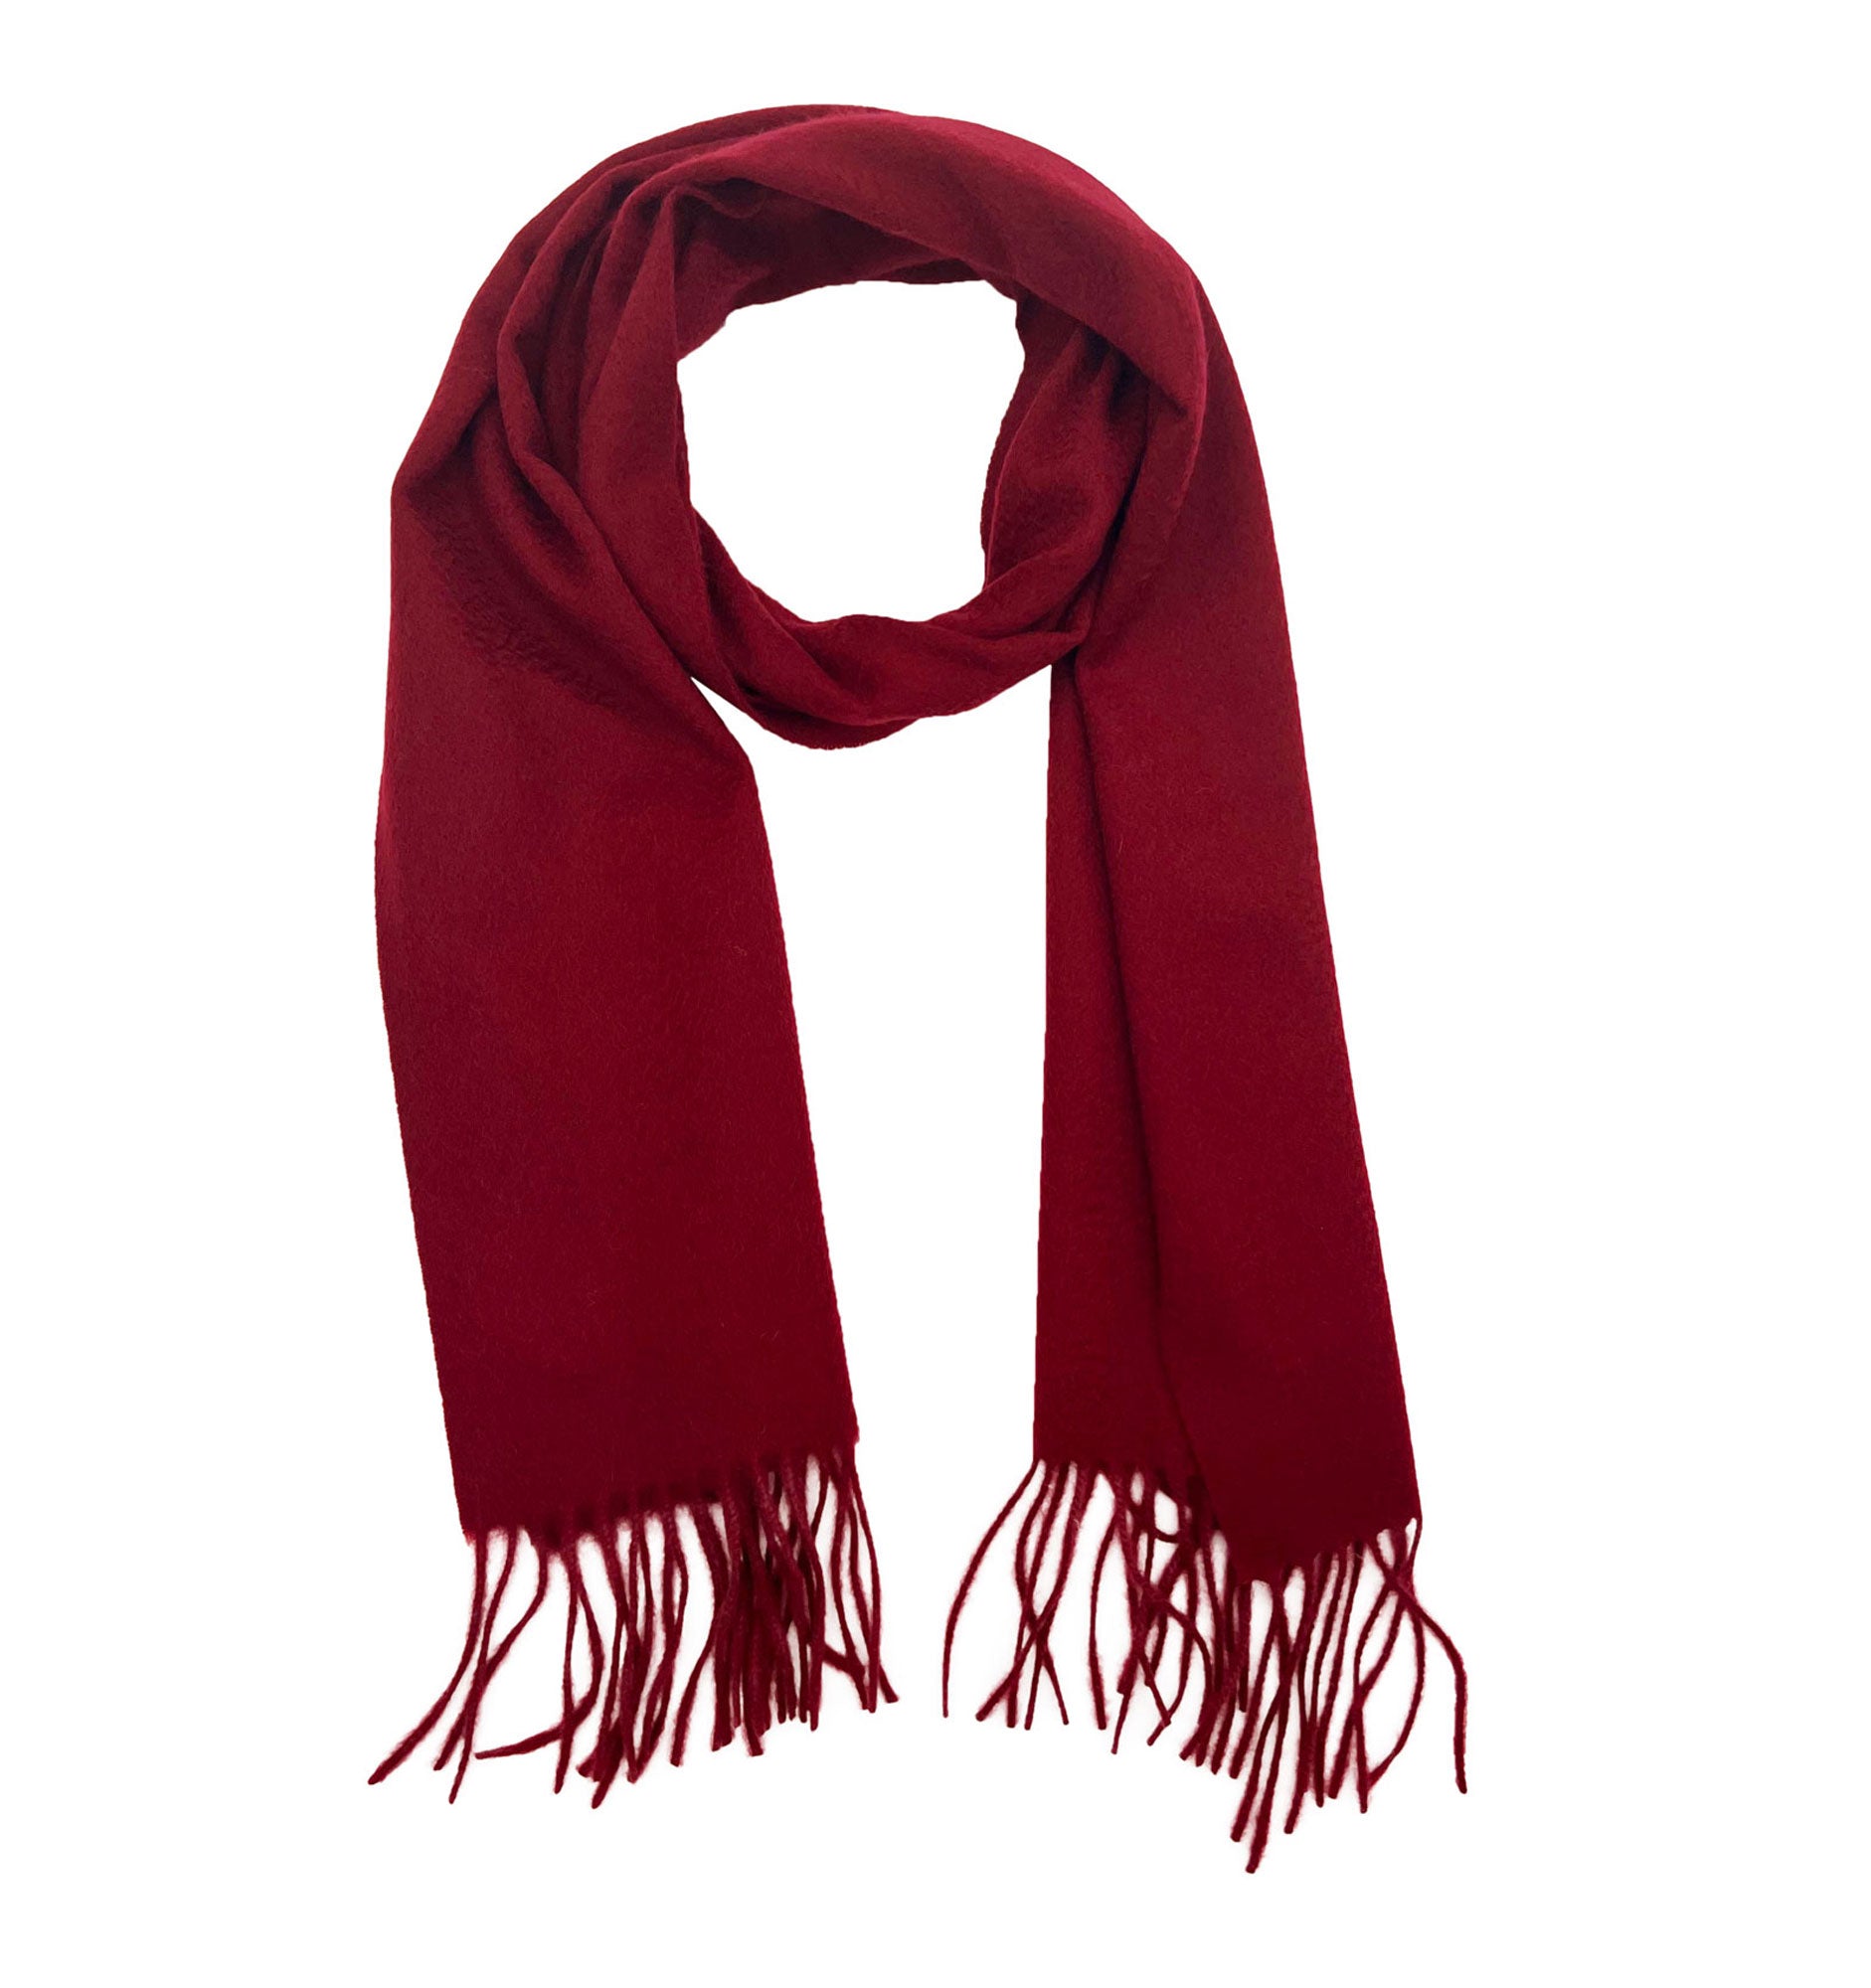 Looped red-burgundy cashmere scarf with both ends parallel and tassles extended.